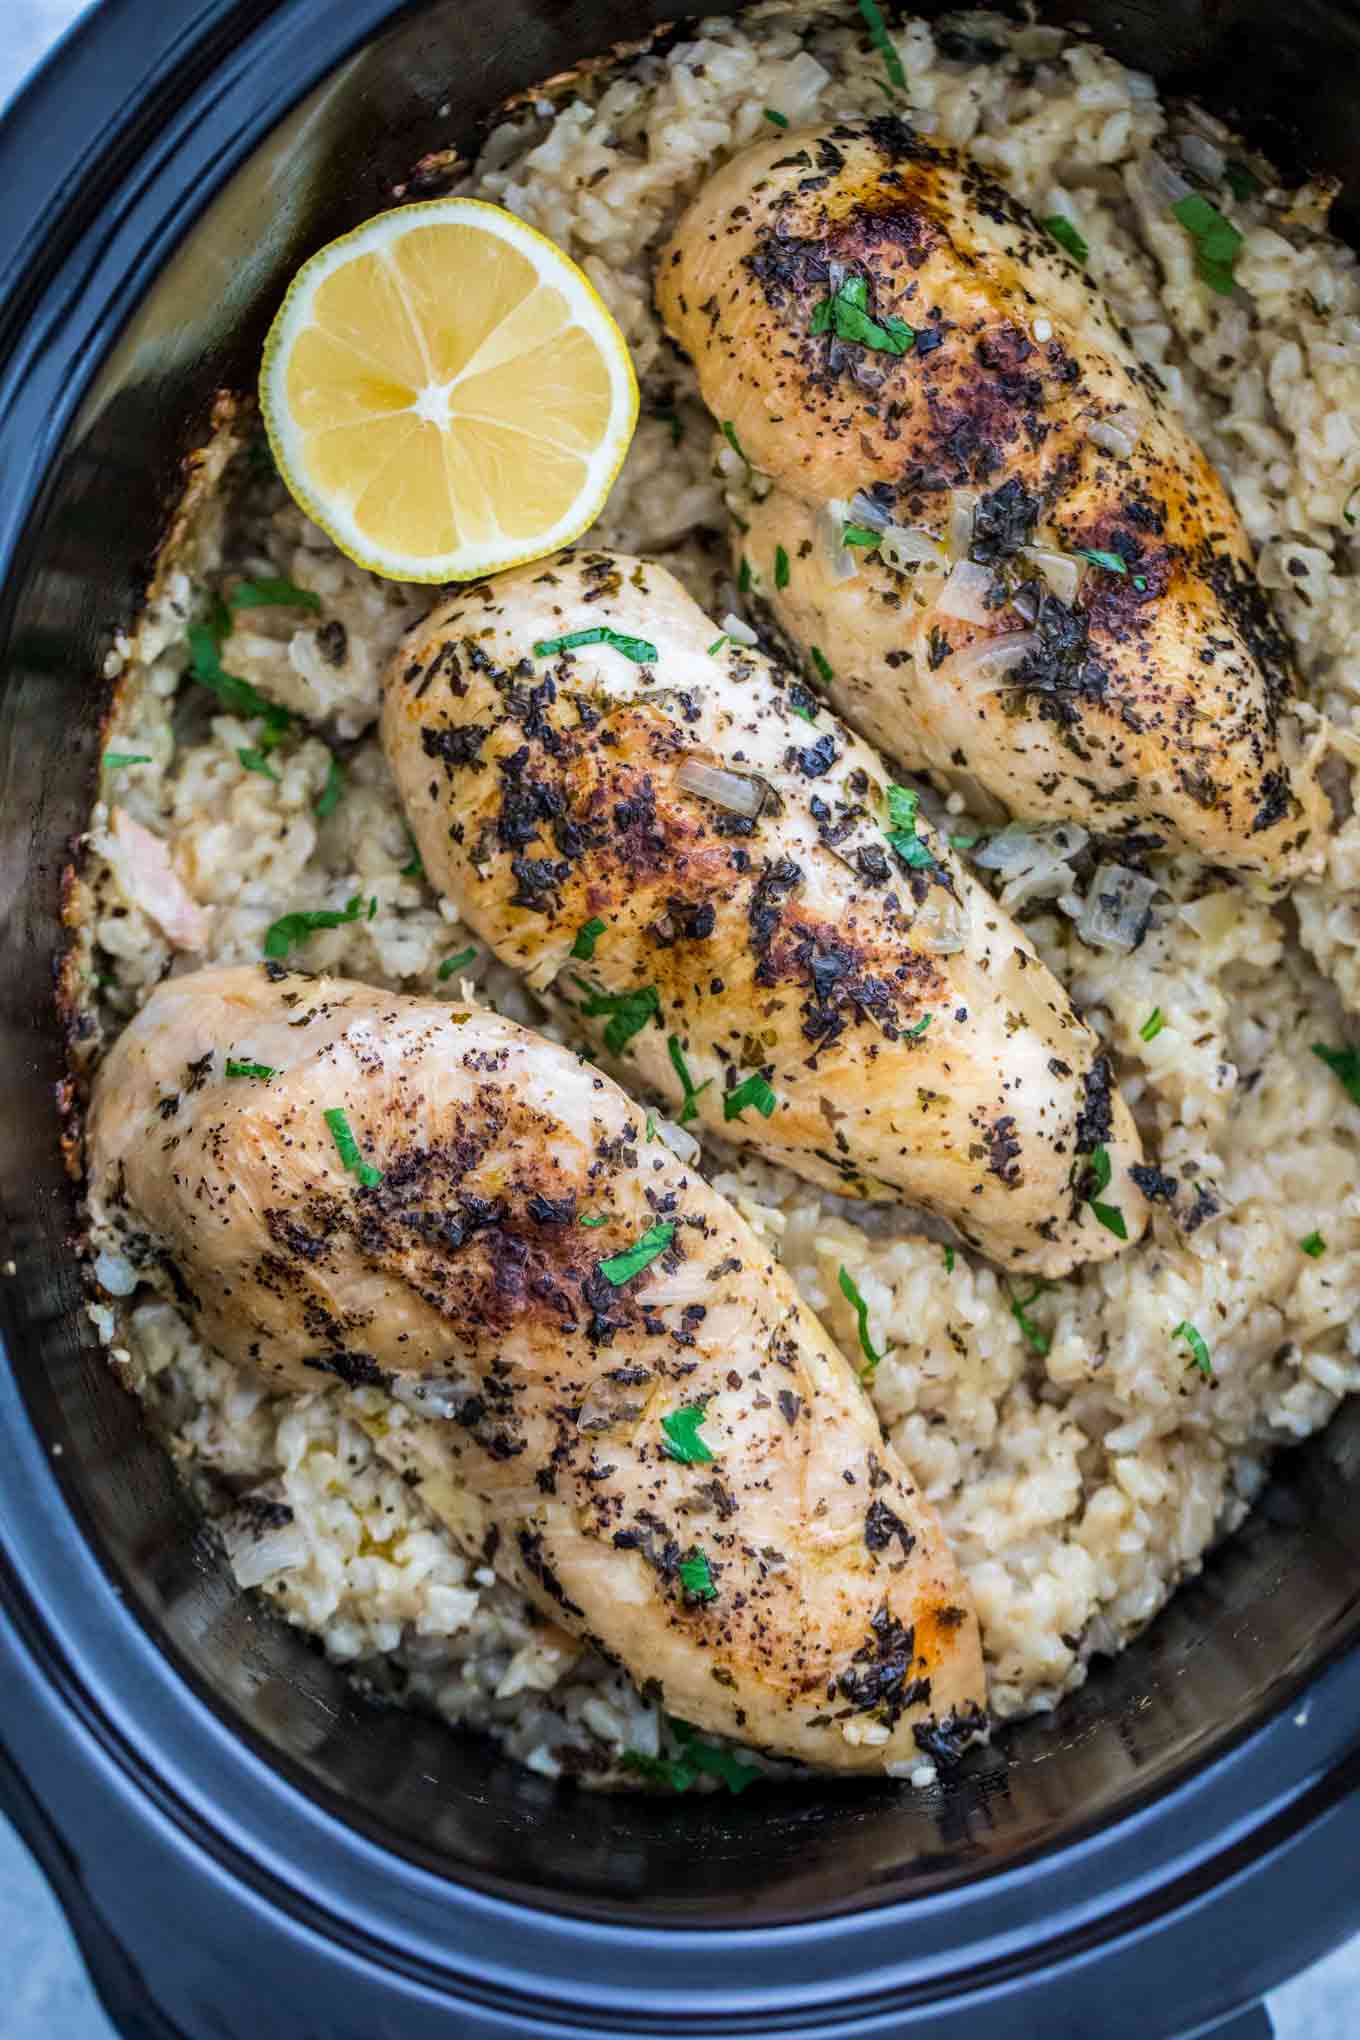 Crockpot Chicken And Rice Video Sweet And Savory Meals,Kielbasa Sausage Recipes With Vegetables